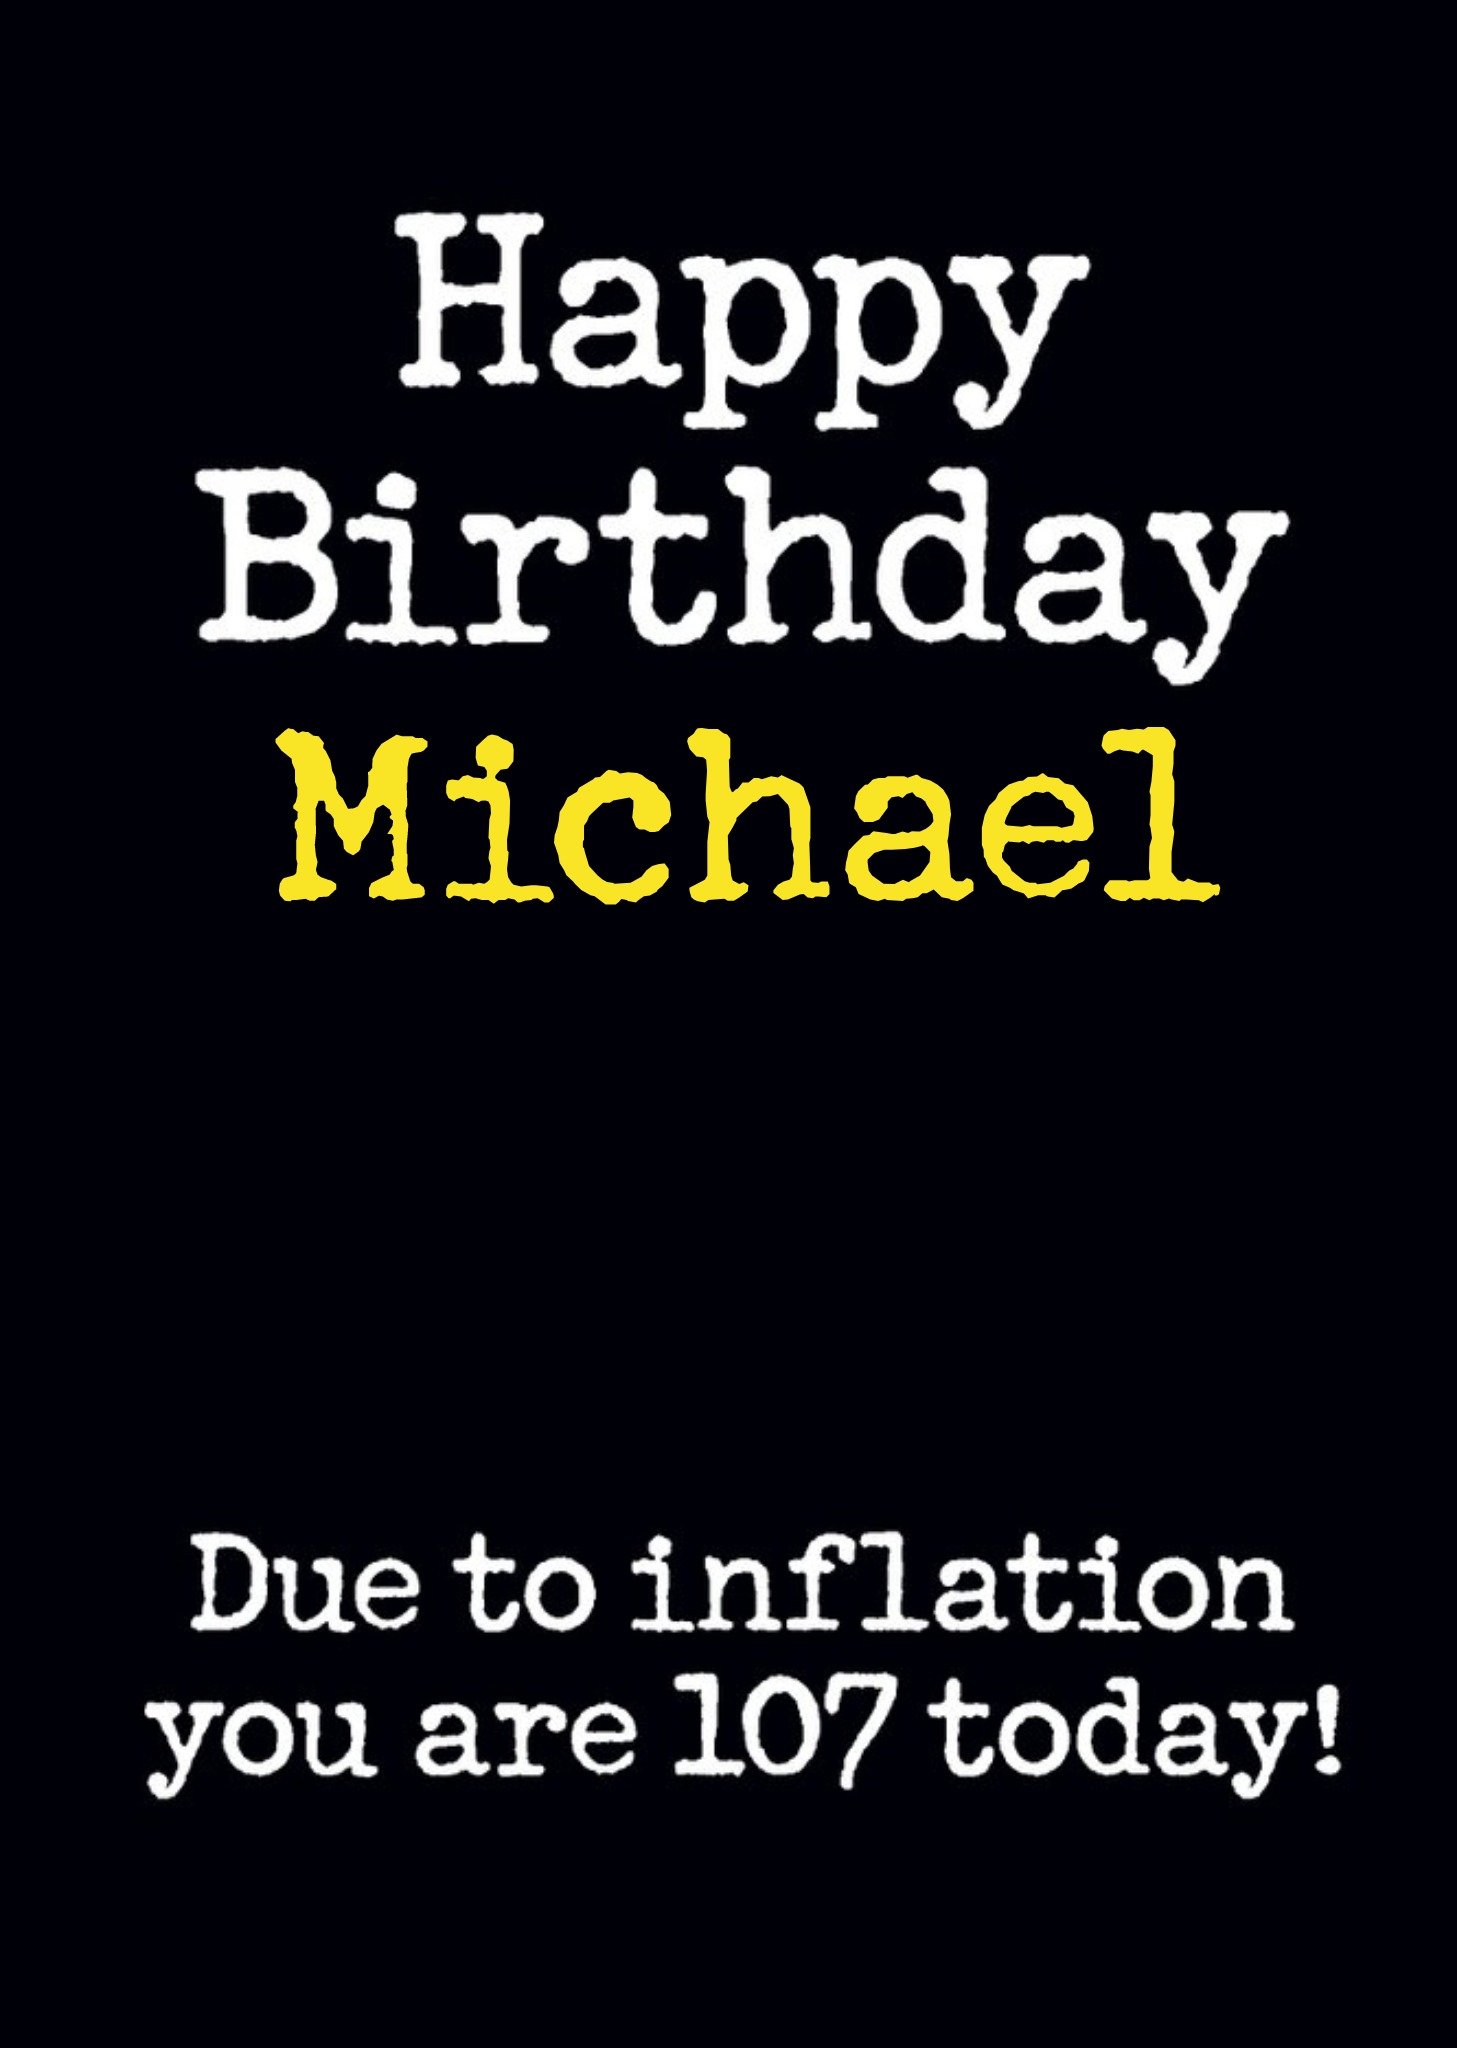 Moonpig 107 Today Funny Inflation Birthday Card, Large